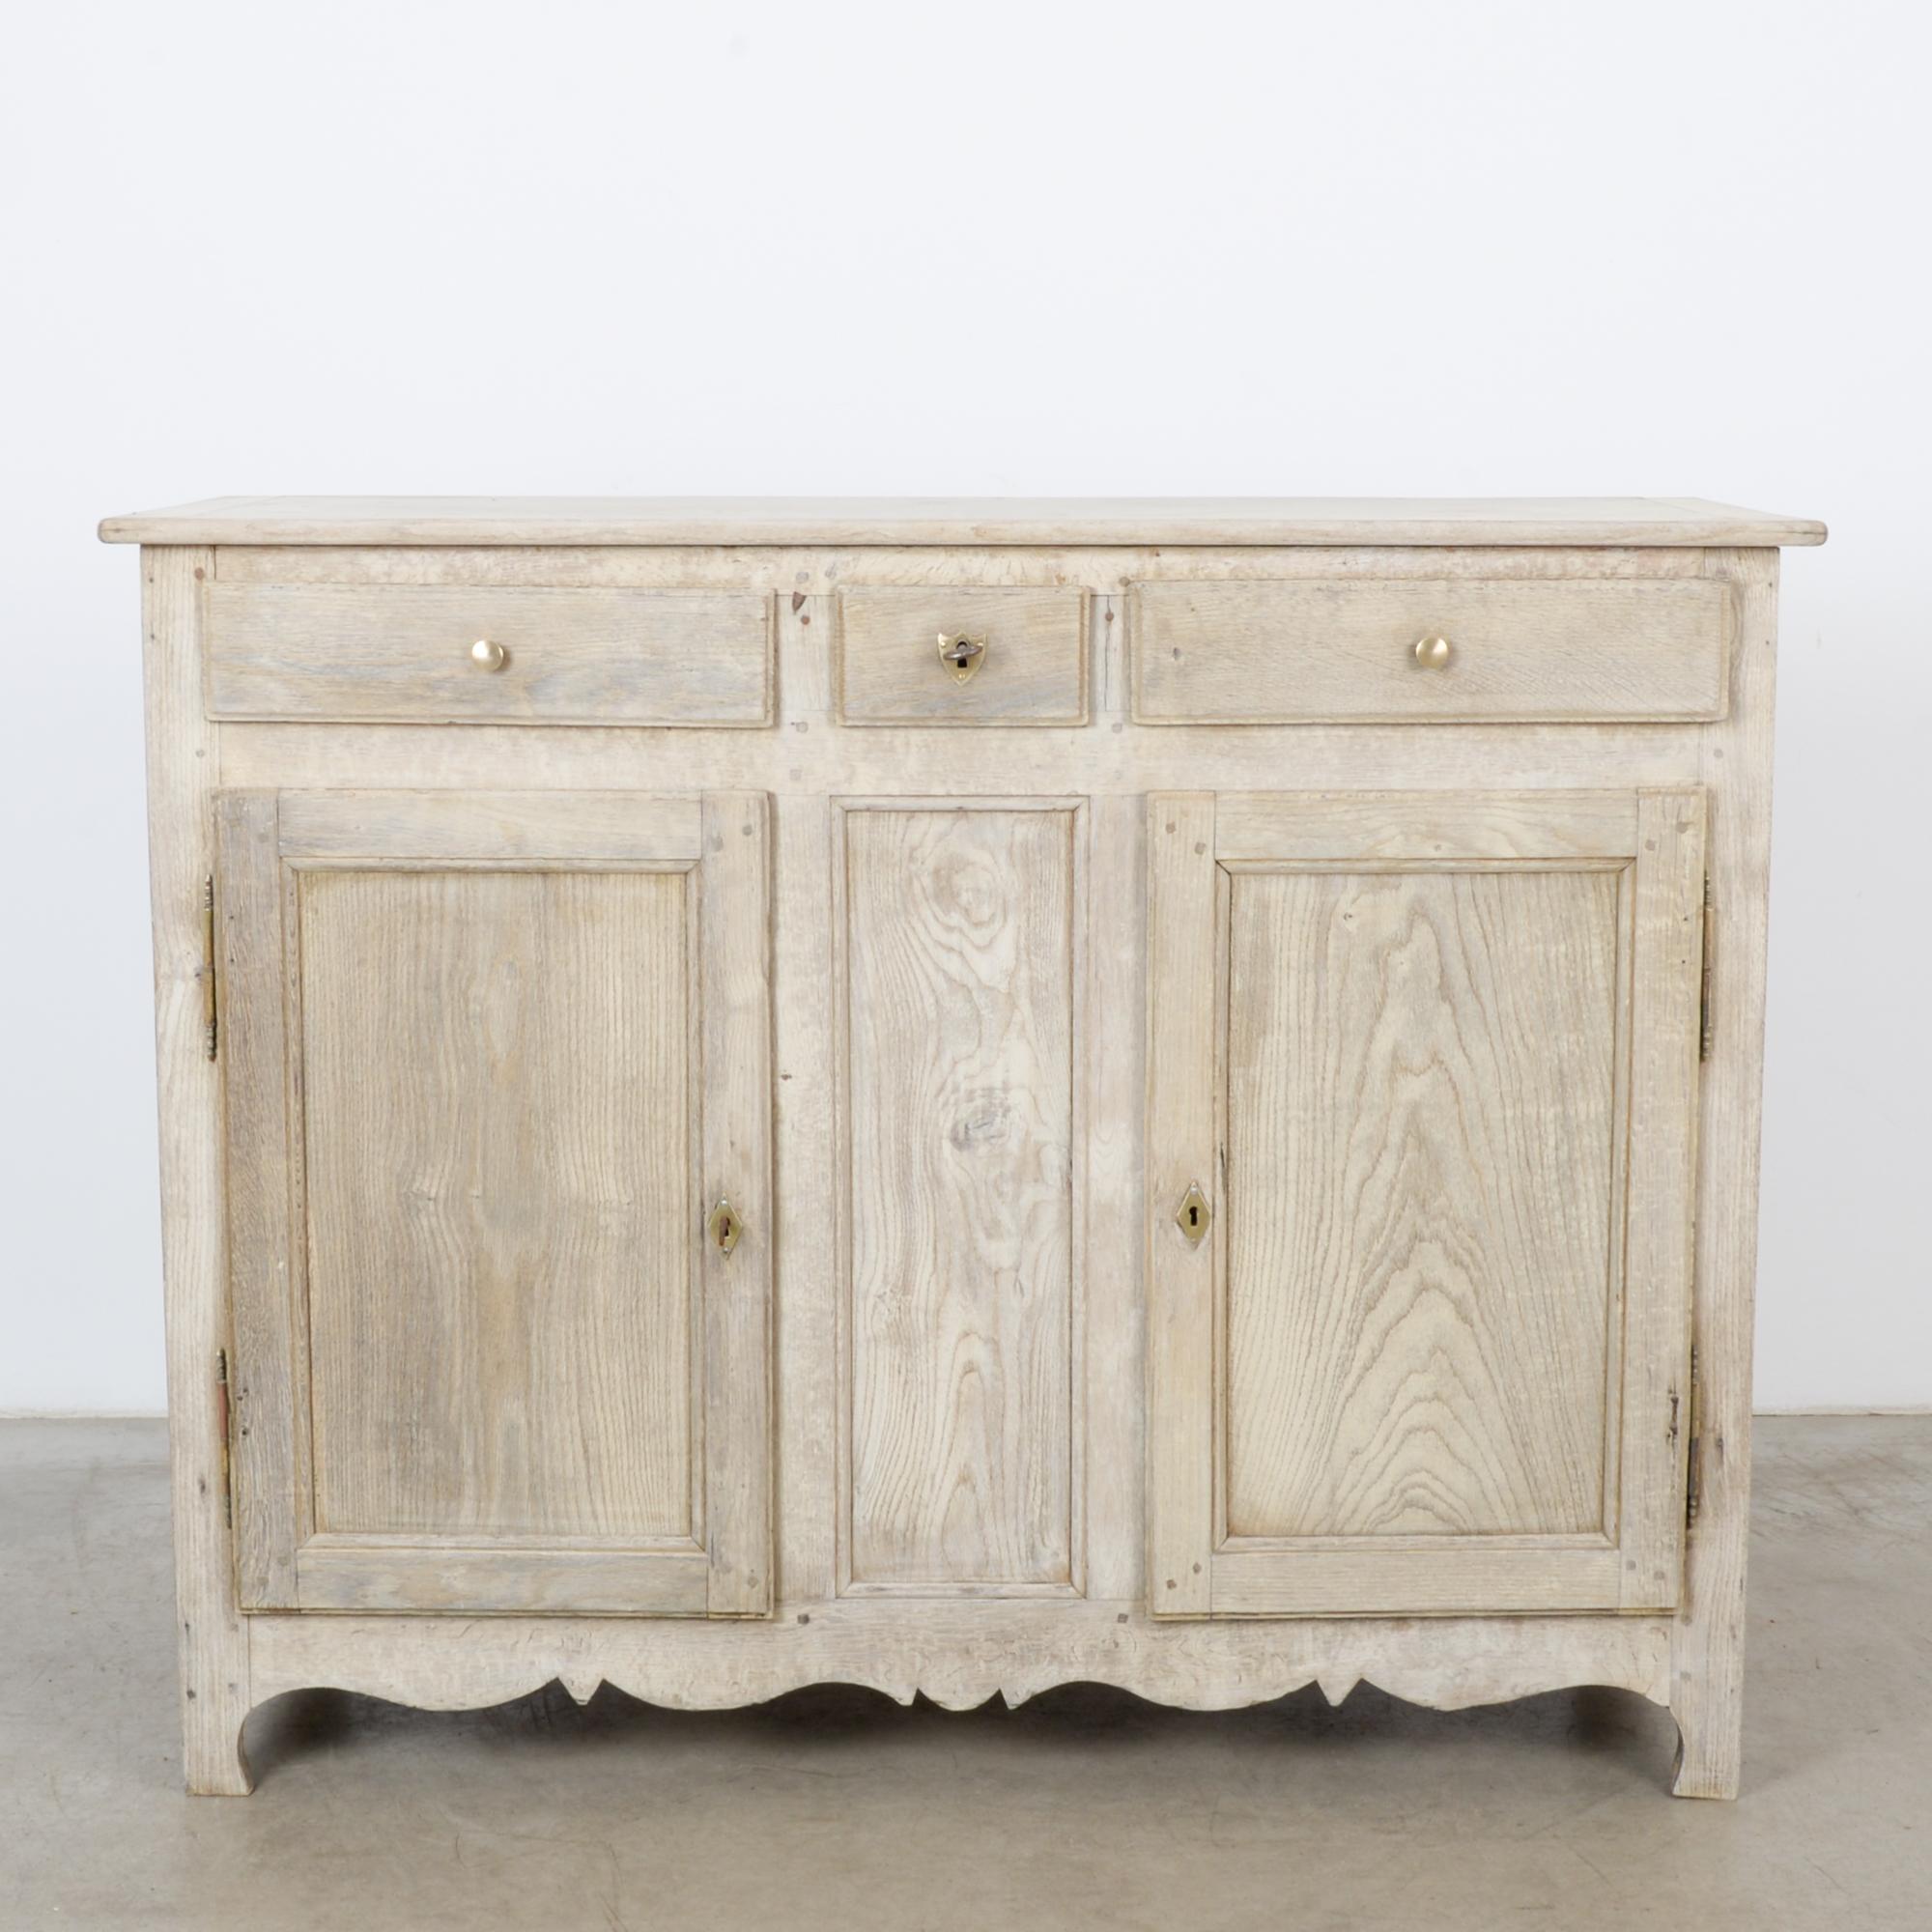 This bleached oak buffet was made in France, circa 1860. The upper section comprises a small drawer between two larger ones; the storage compartment below has two shelves. Slightly elevated on legs, the buffet features a scalloped apron. The rear